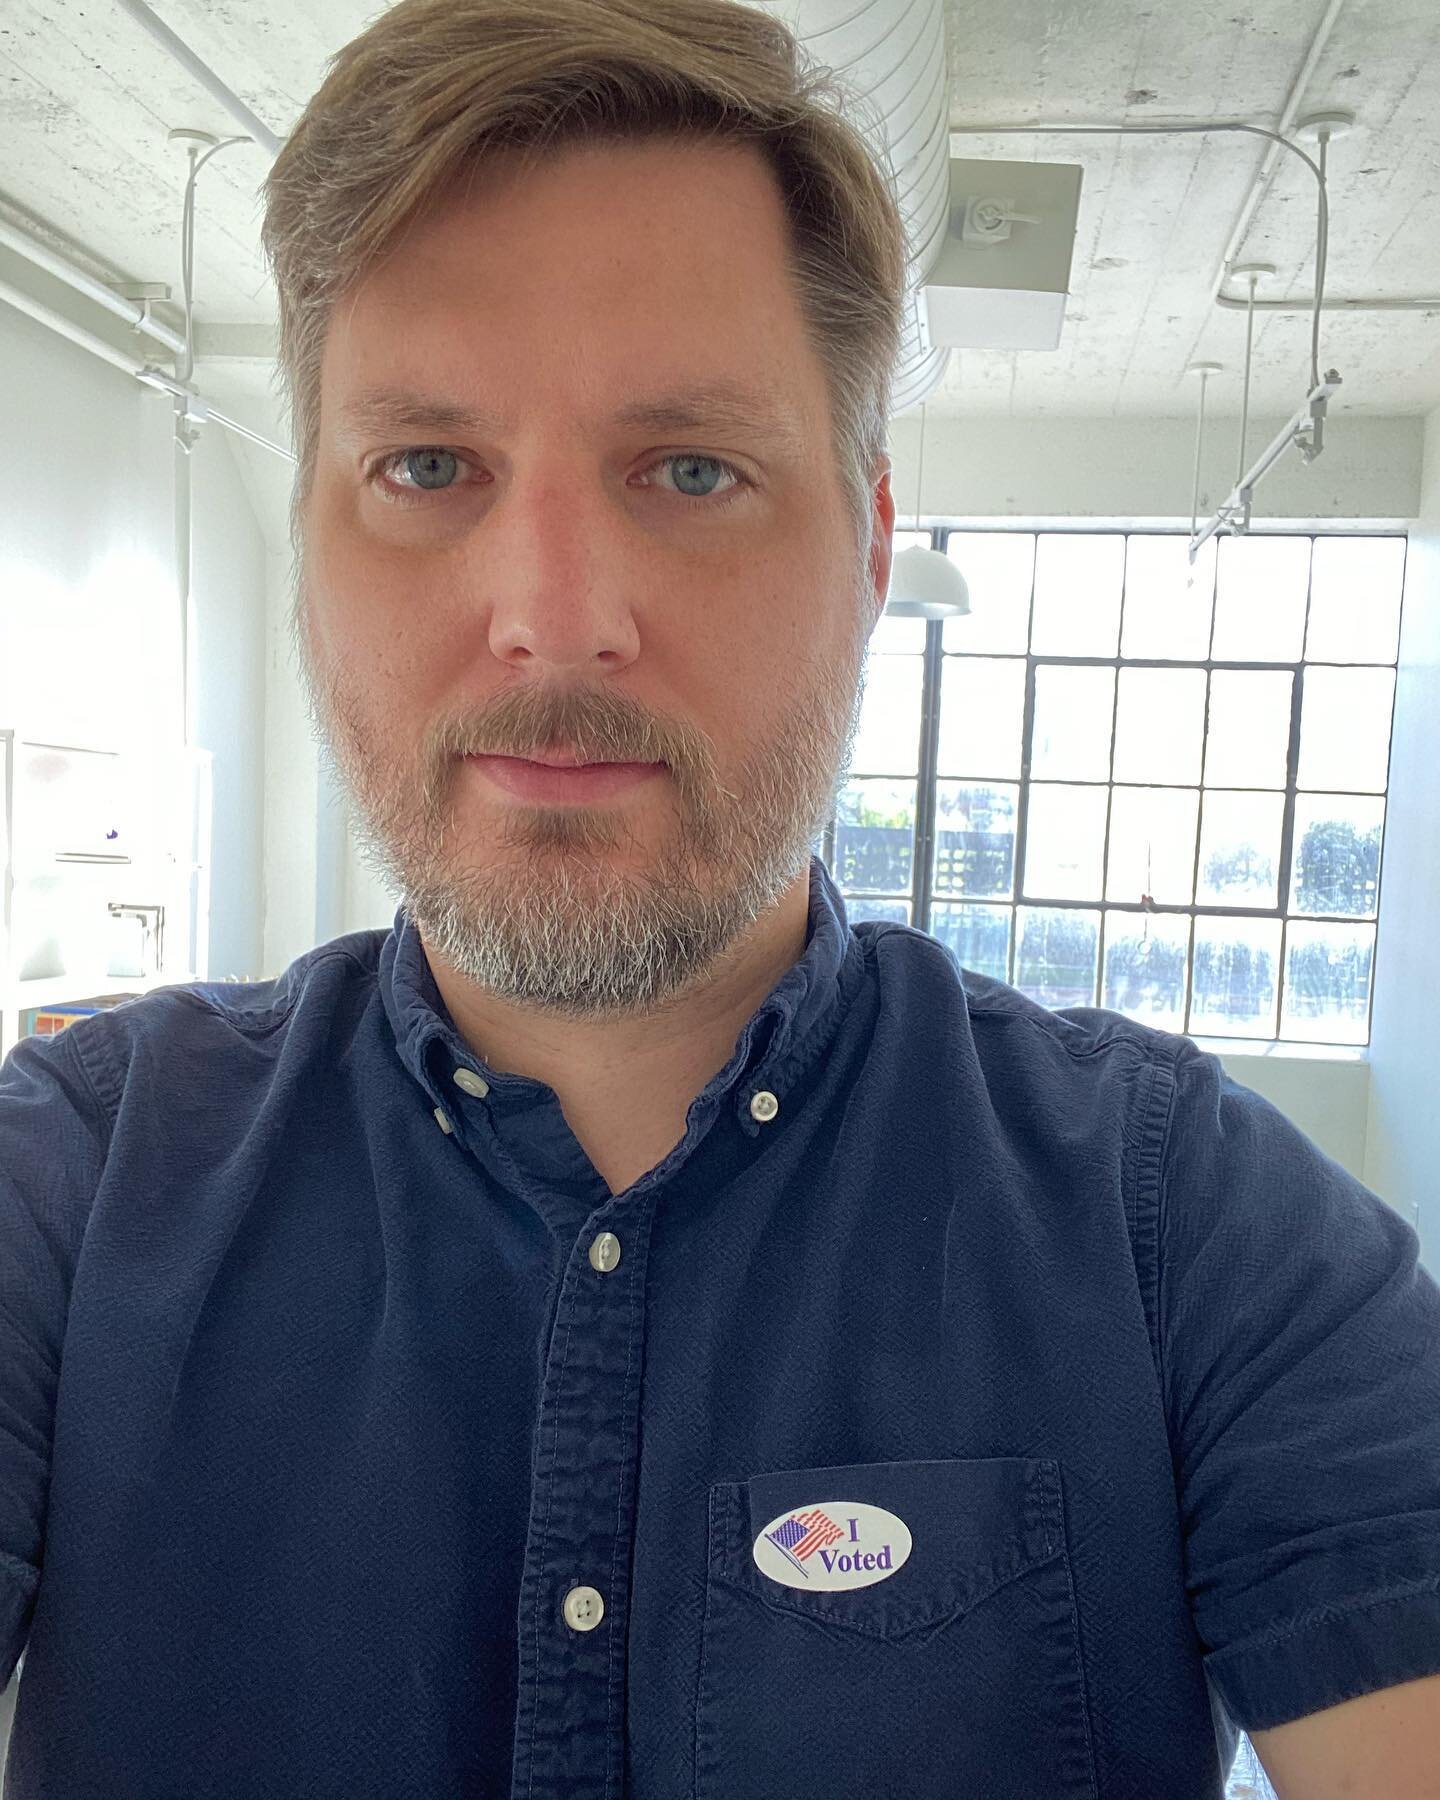 My first &ldquo;I voted&rdquo; selfie. Maybe my first selfie at all. That&rsquo;s how eager I was to vote this morning. Early voting has begun in Texas. Go vote. #bidenharris2020